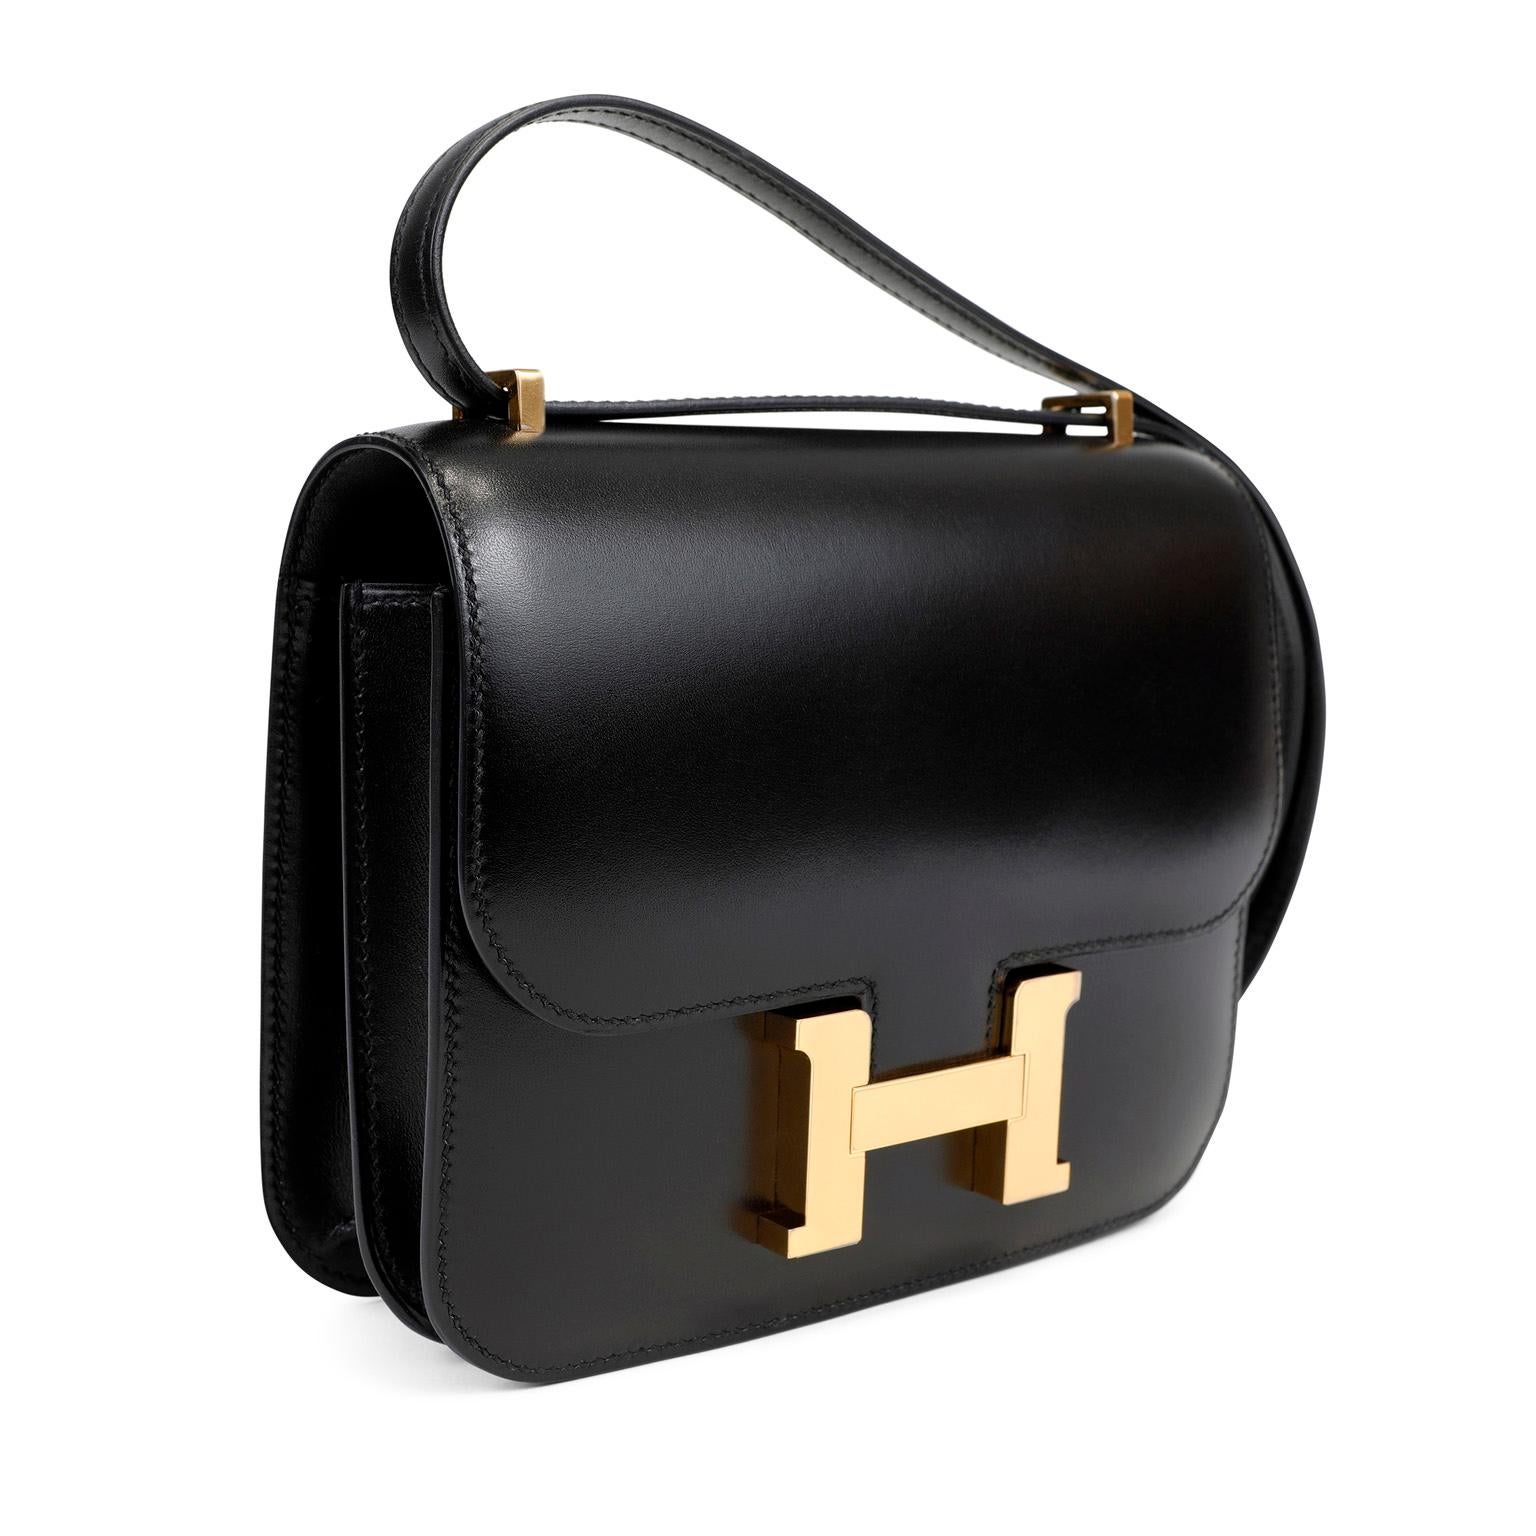 This authentic Hermès Black Box Calf Mini Constance in pristine condition.  The Constance has simple clean lines and combines classic with modern.  The adjustable strap allows for shoulder or cross body wear. The large gold tone signature Hermès